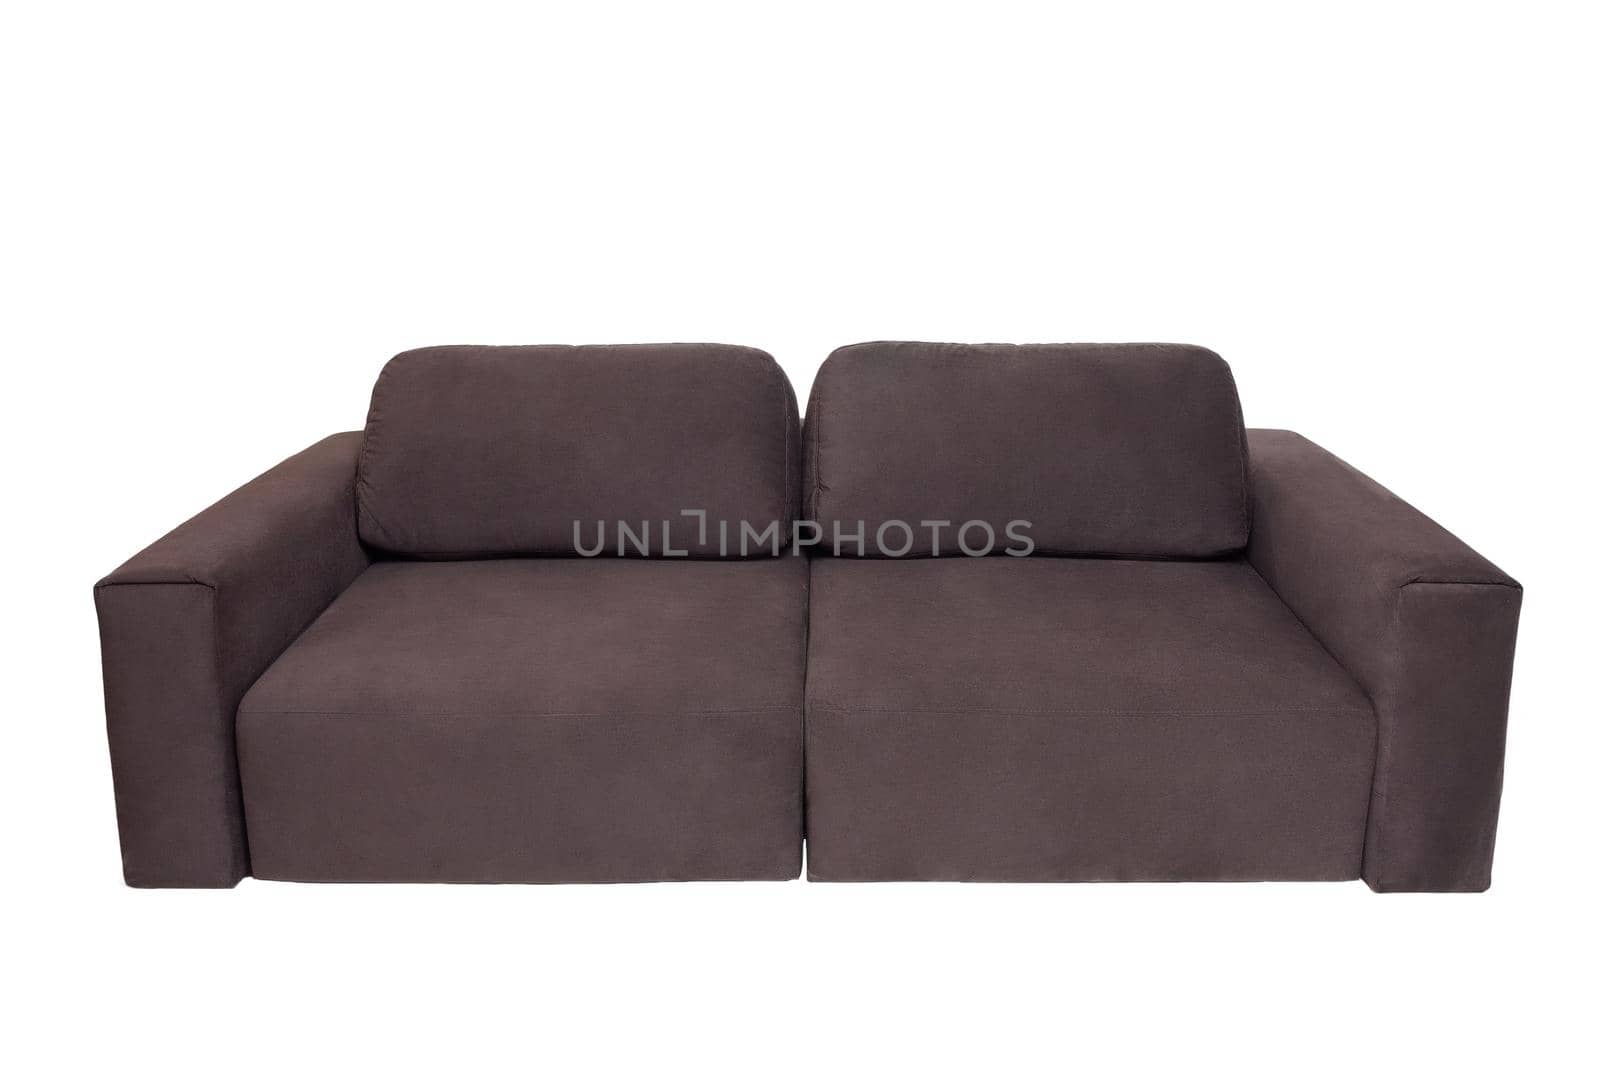 Modern brown fabric sofa isolated on white background. soft couch with two pillows. front view. strict style of furniture, interior, home design